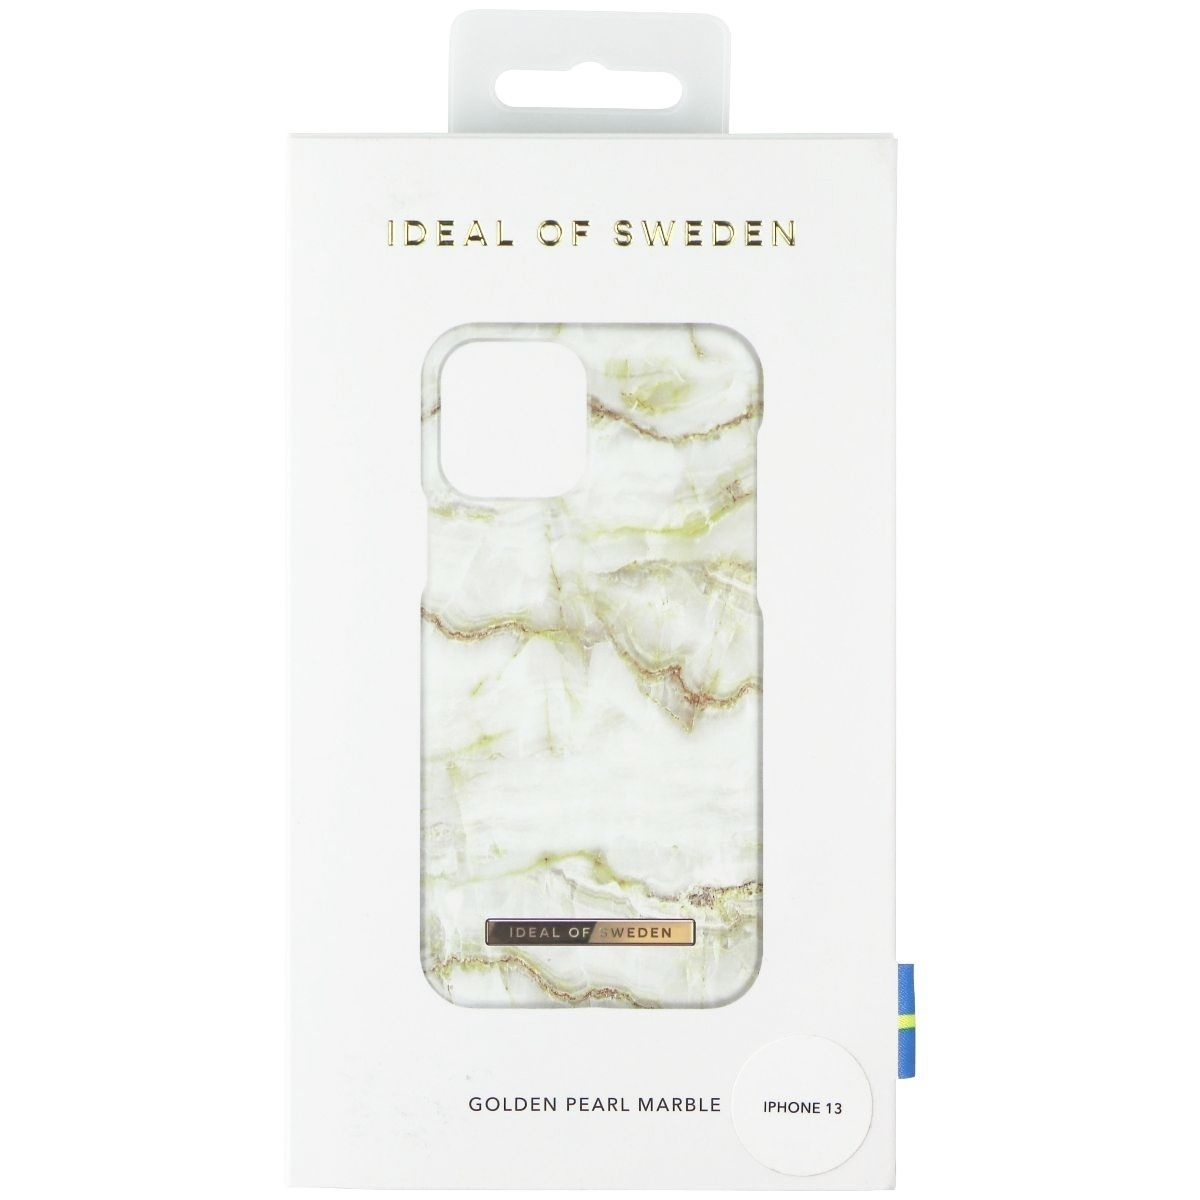 IDeal Of Sweden Hard Case For Apple IPhone 13 - Golden Pearl Marble